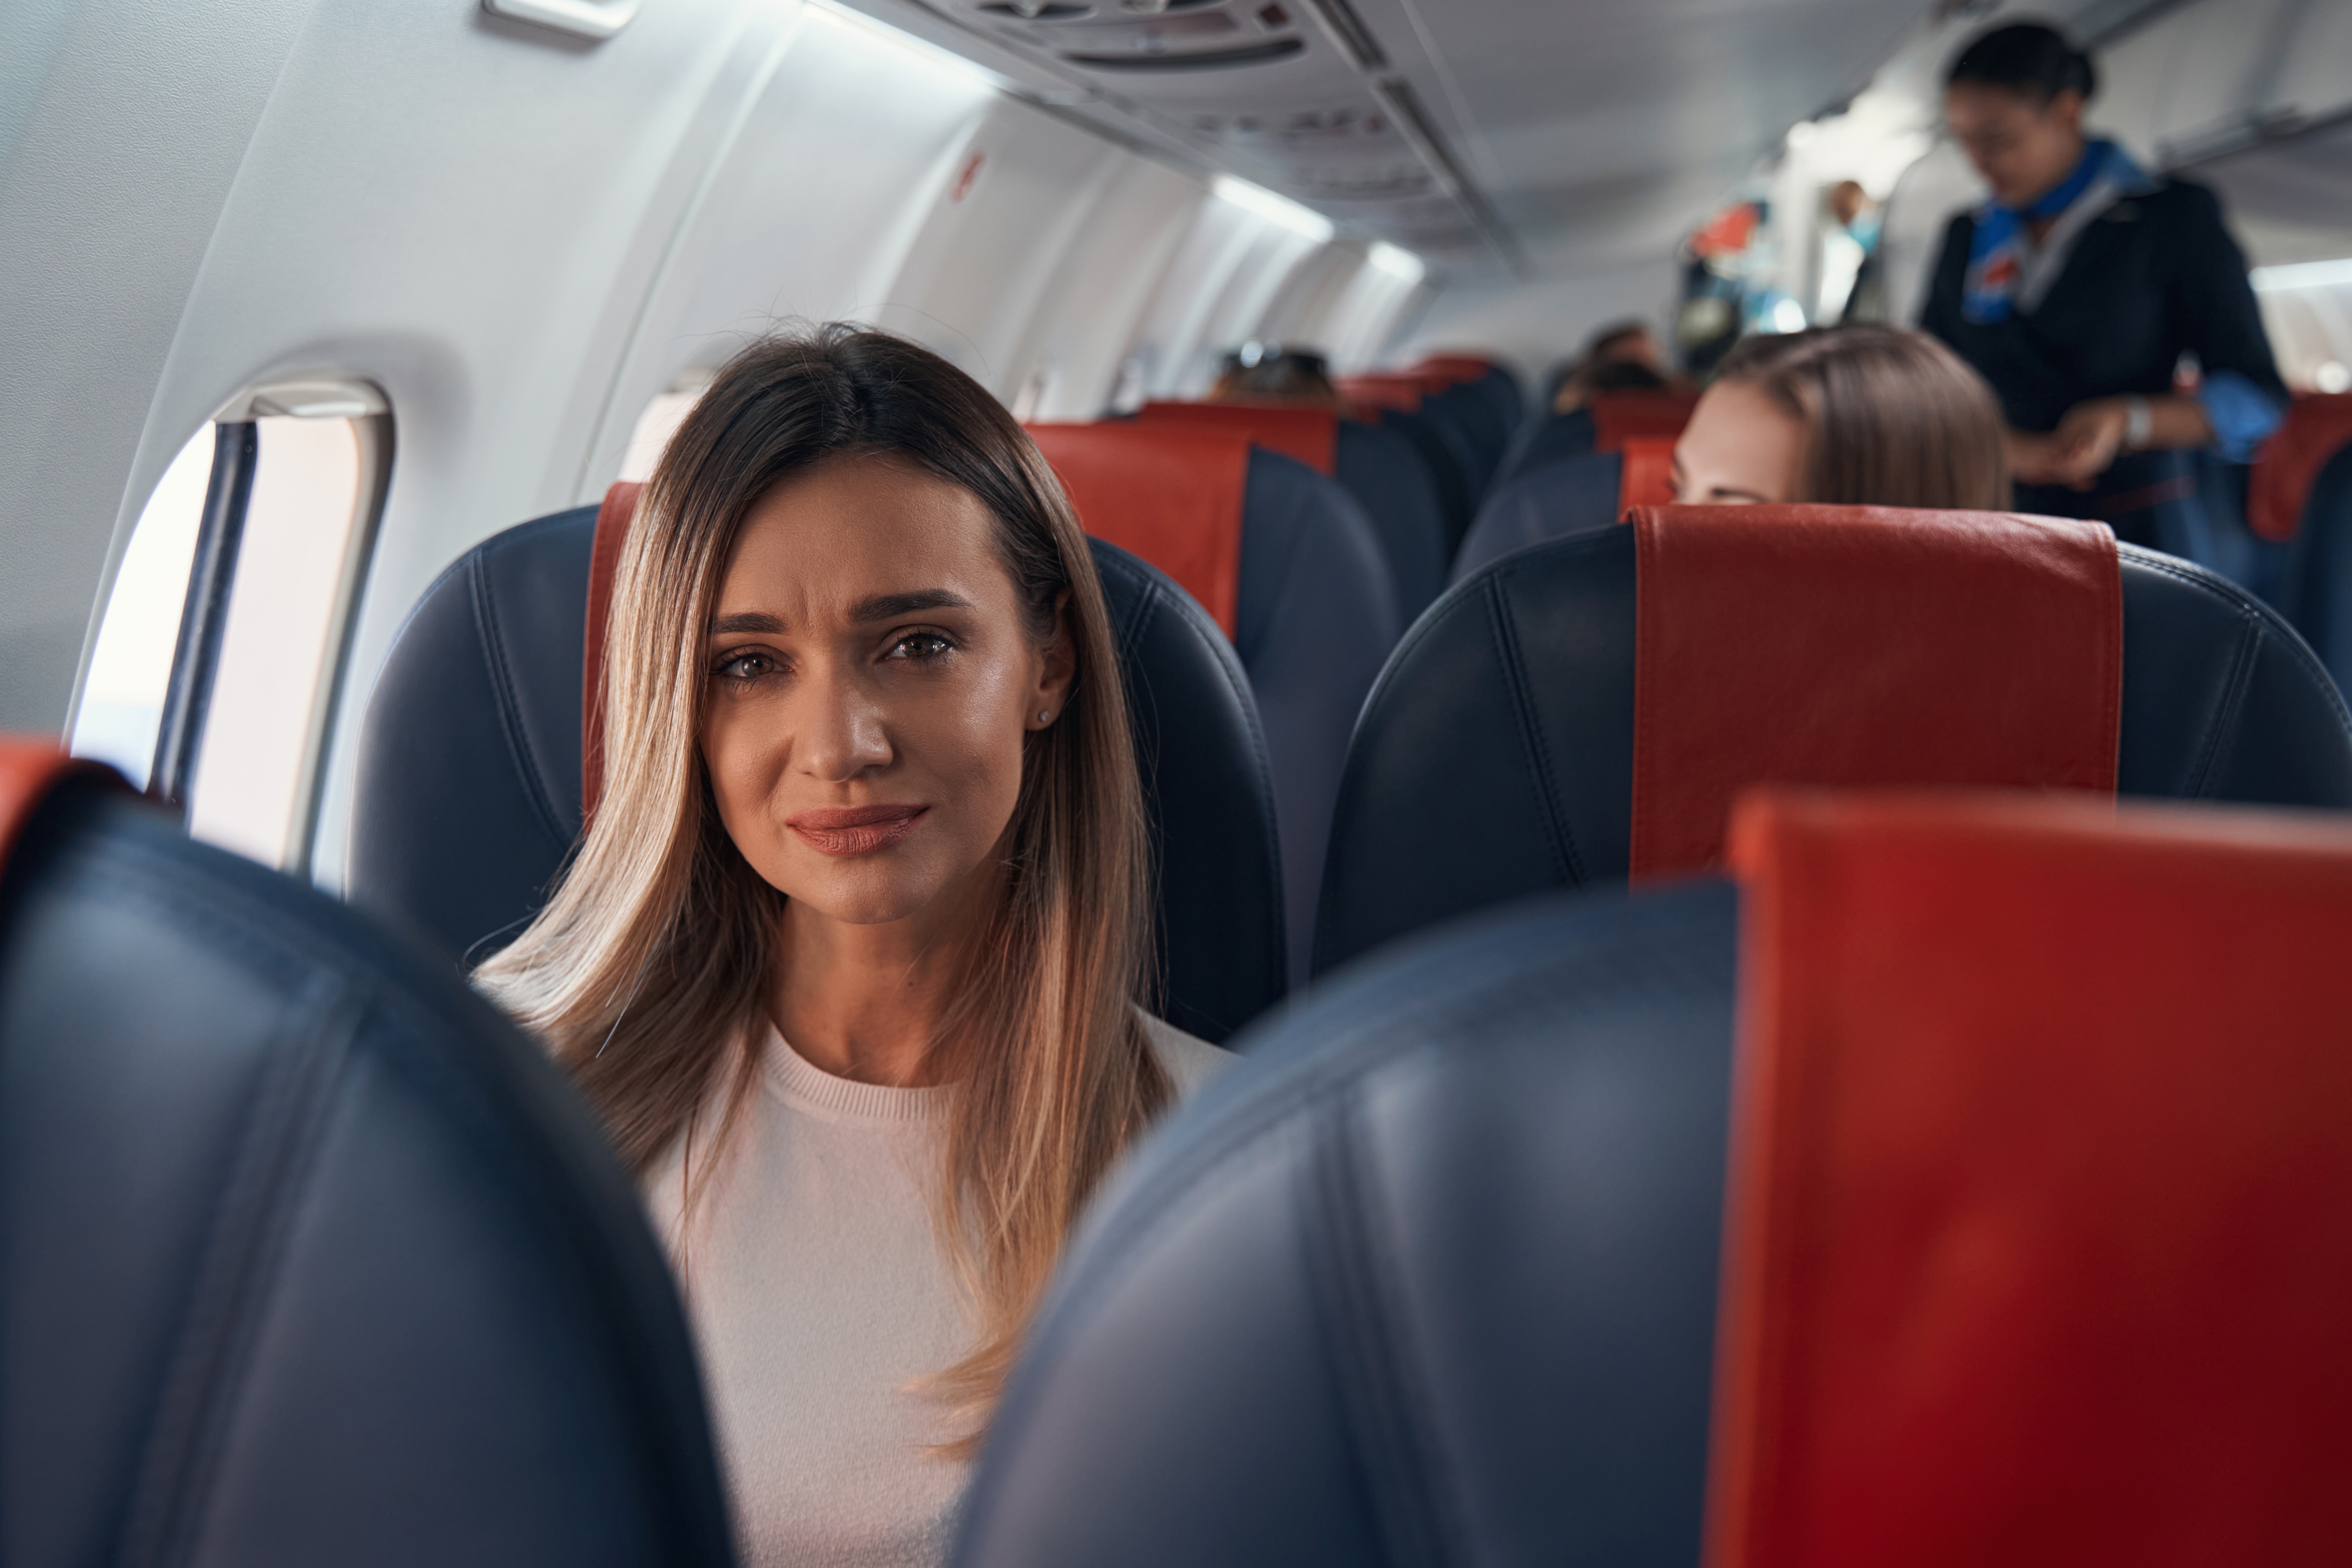 A sad woman in an airplane | Source: Shutterstock